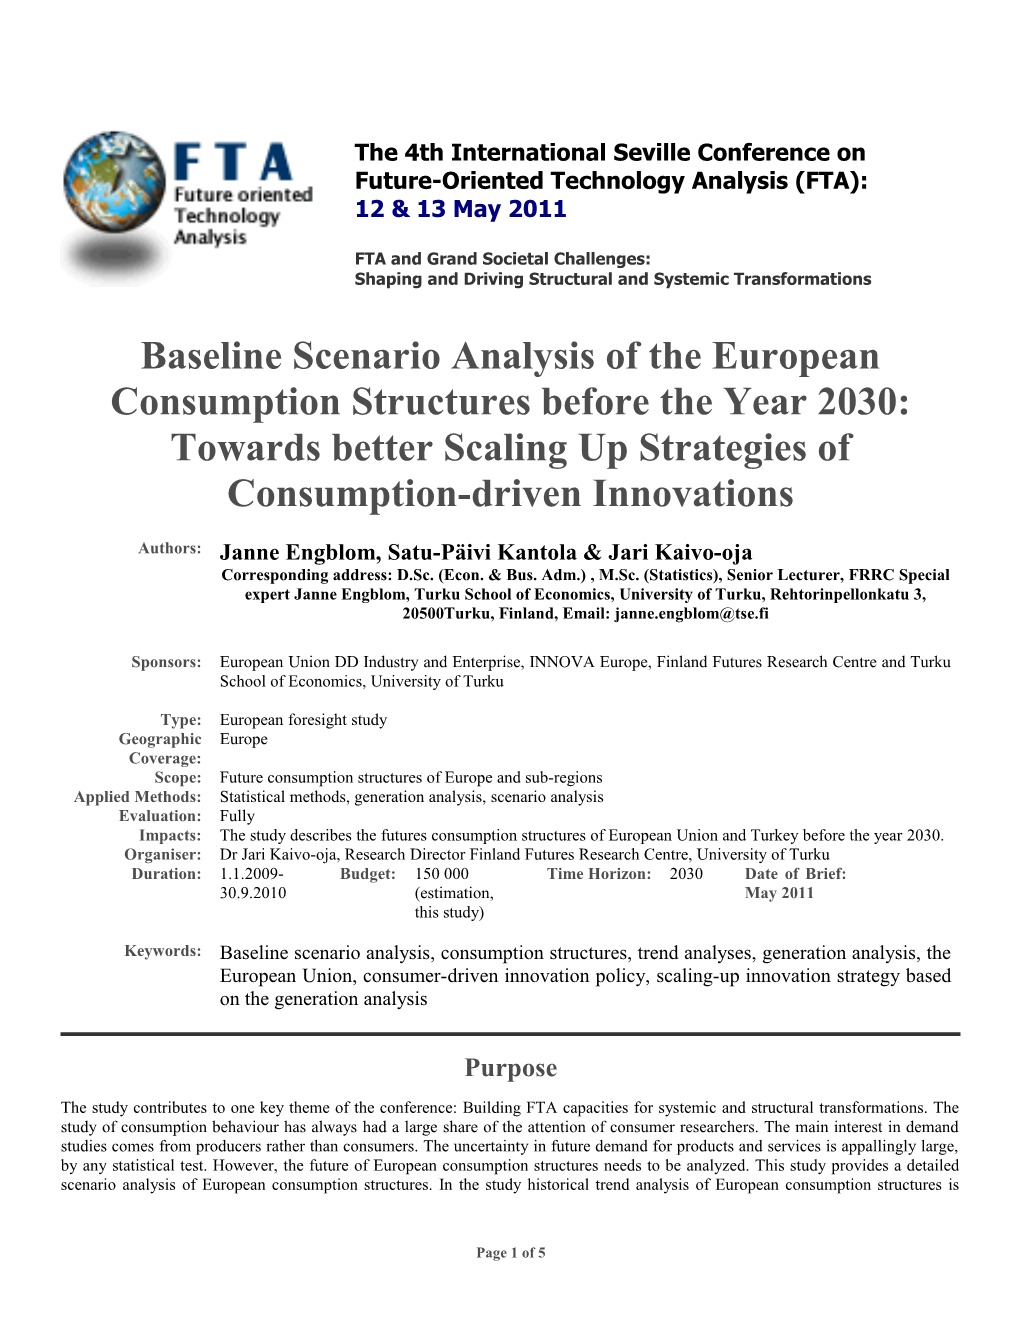 Baseline Scenario Analysis of the European Consumption Structures Before the Year 2030